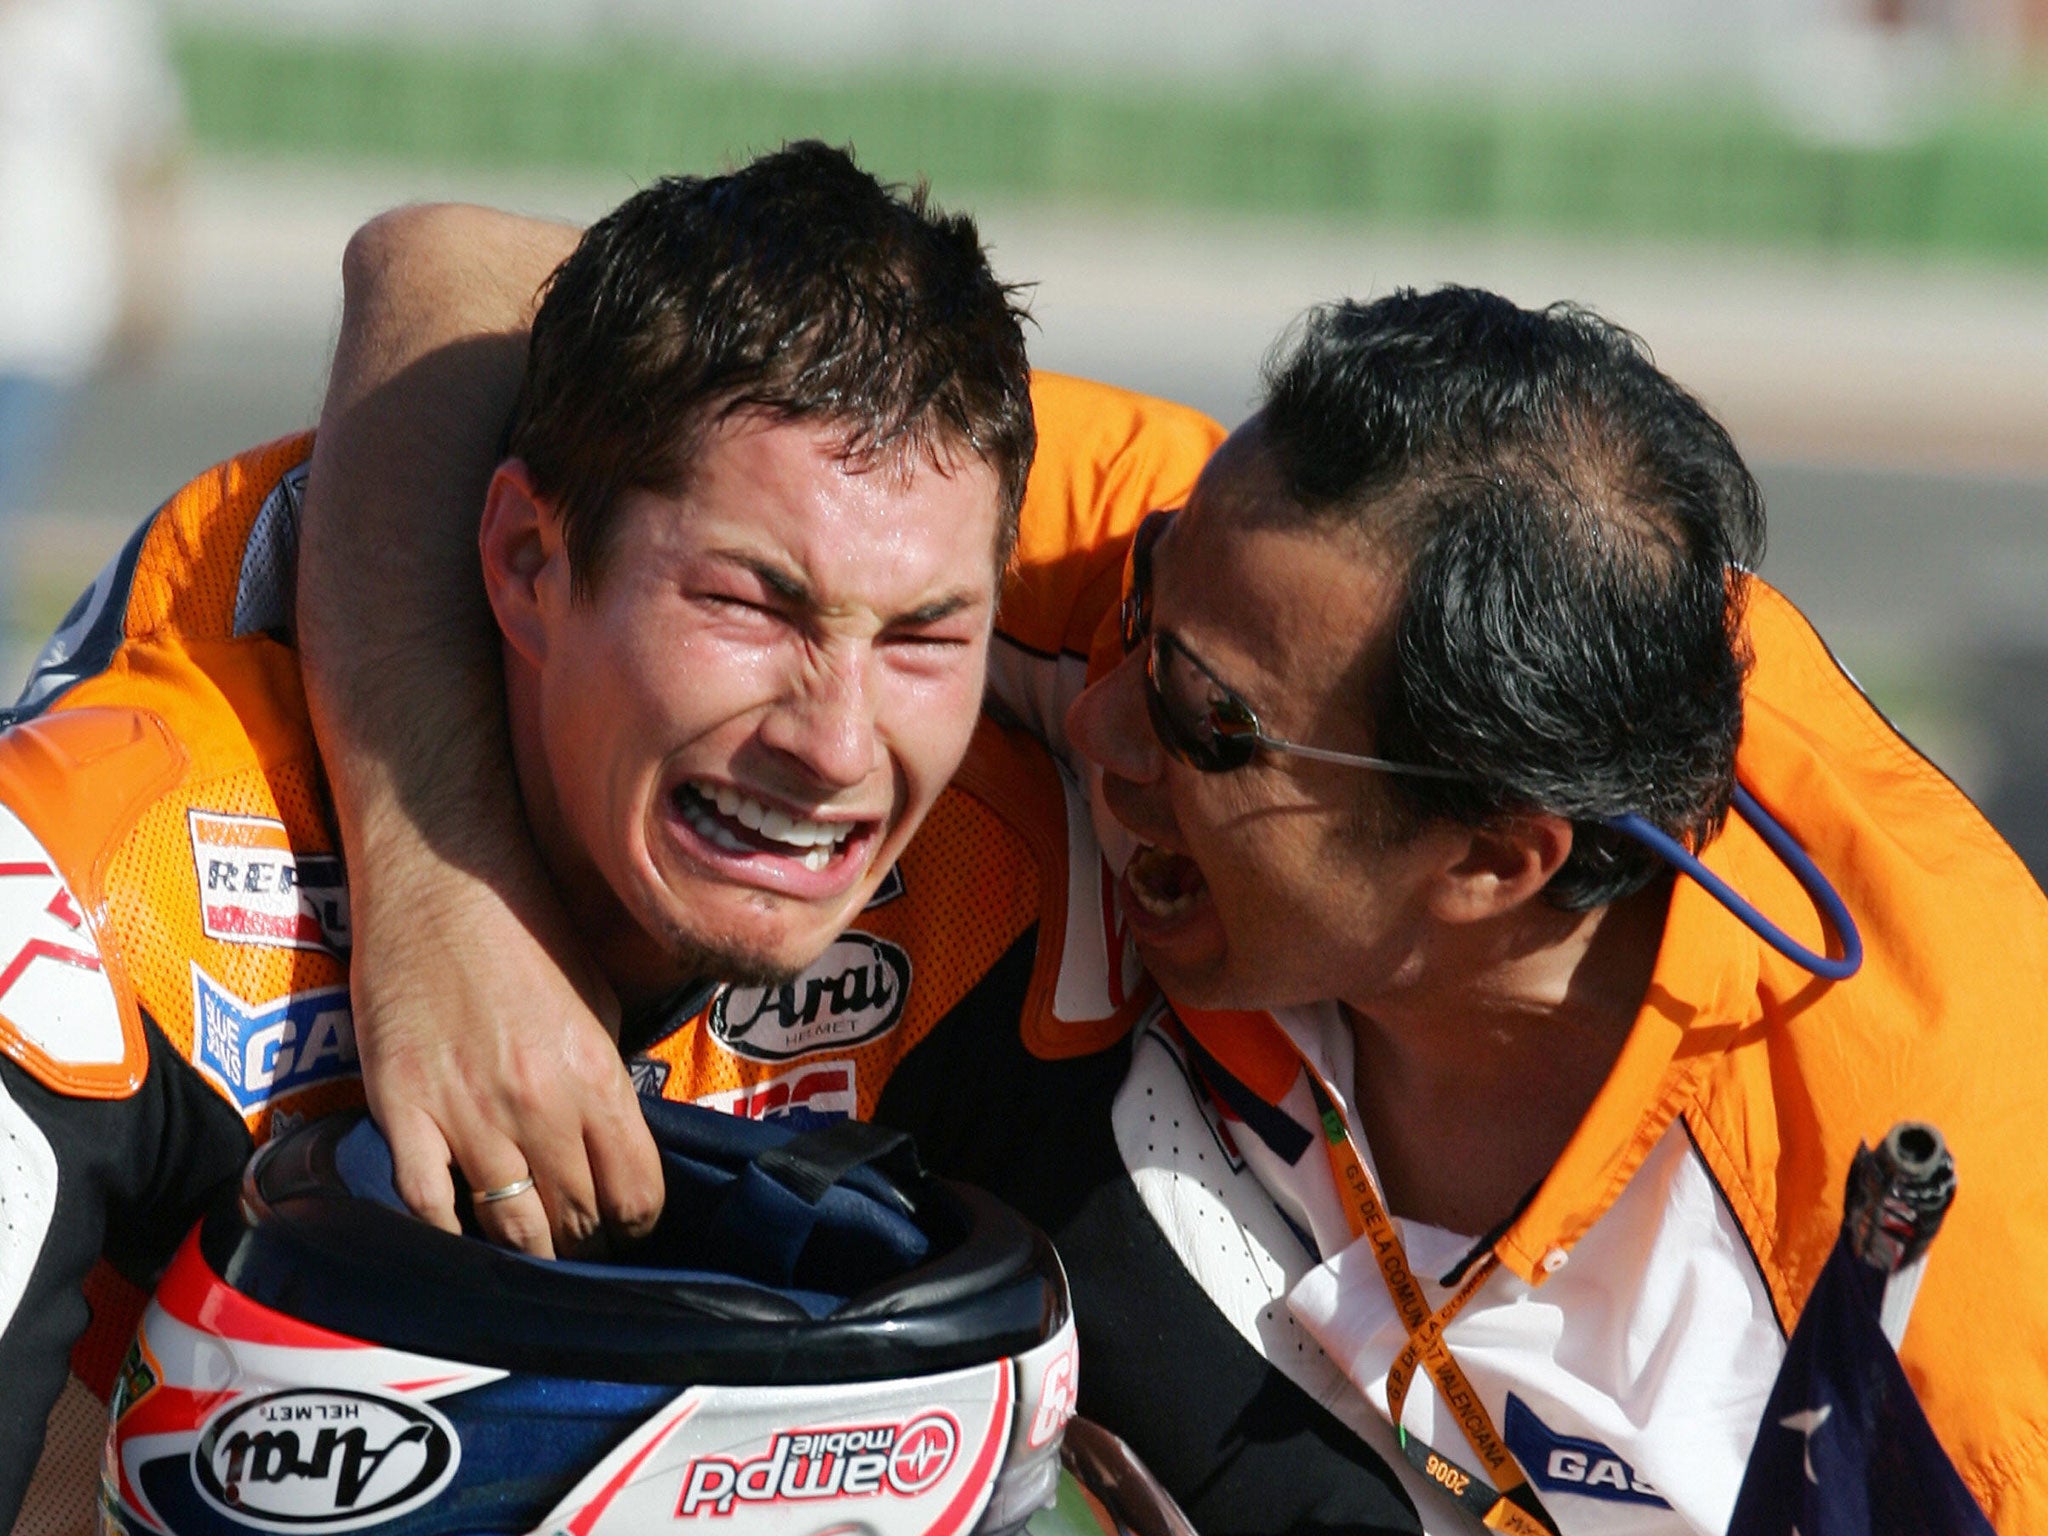 Nicky Hayden died after suffering head and chest injuries in a cycling accident in Italy